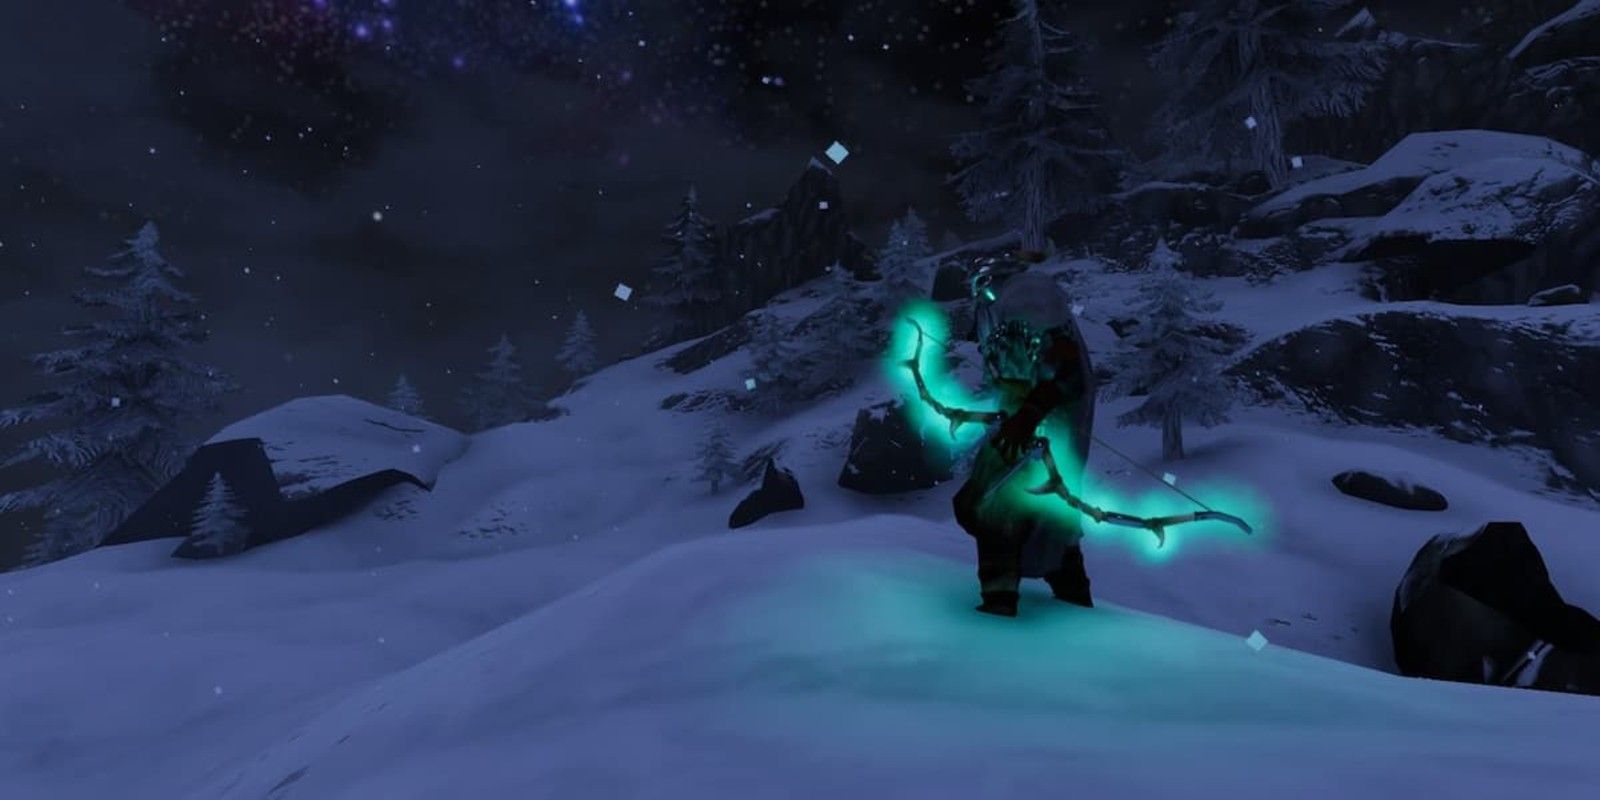 A player uses a glowing bow on a snowy mountain in Valheim